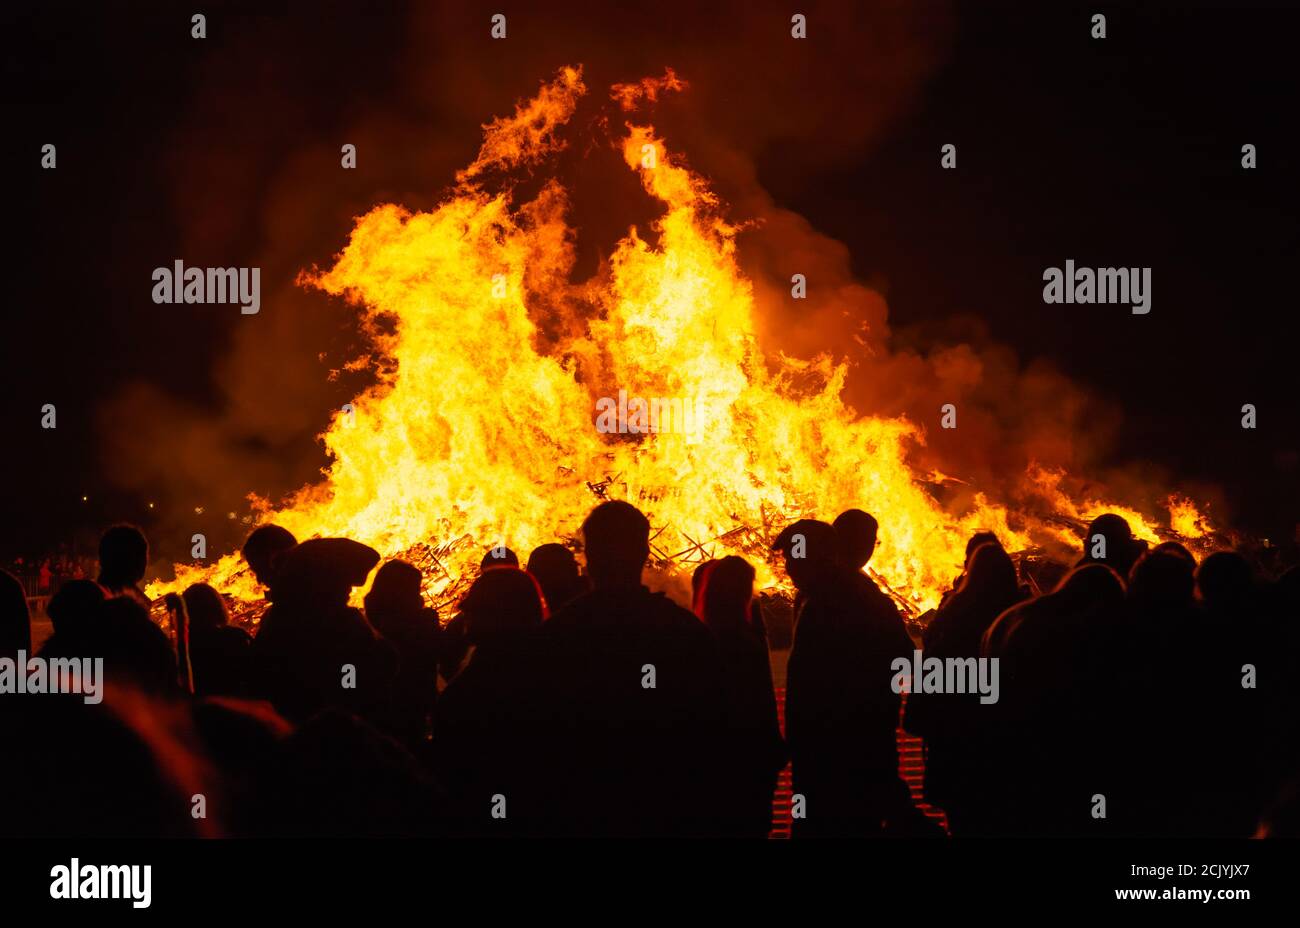 People in silhouette standing watching a large bonfire at the annual Guy Fawkes & Bonfire Night celebrations in Littlehampton, West Sussex, UK. Stock Photo